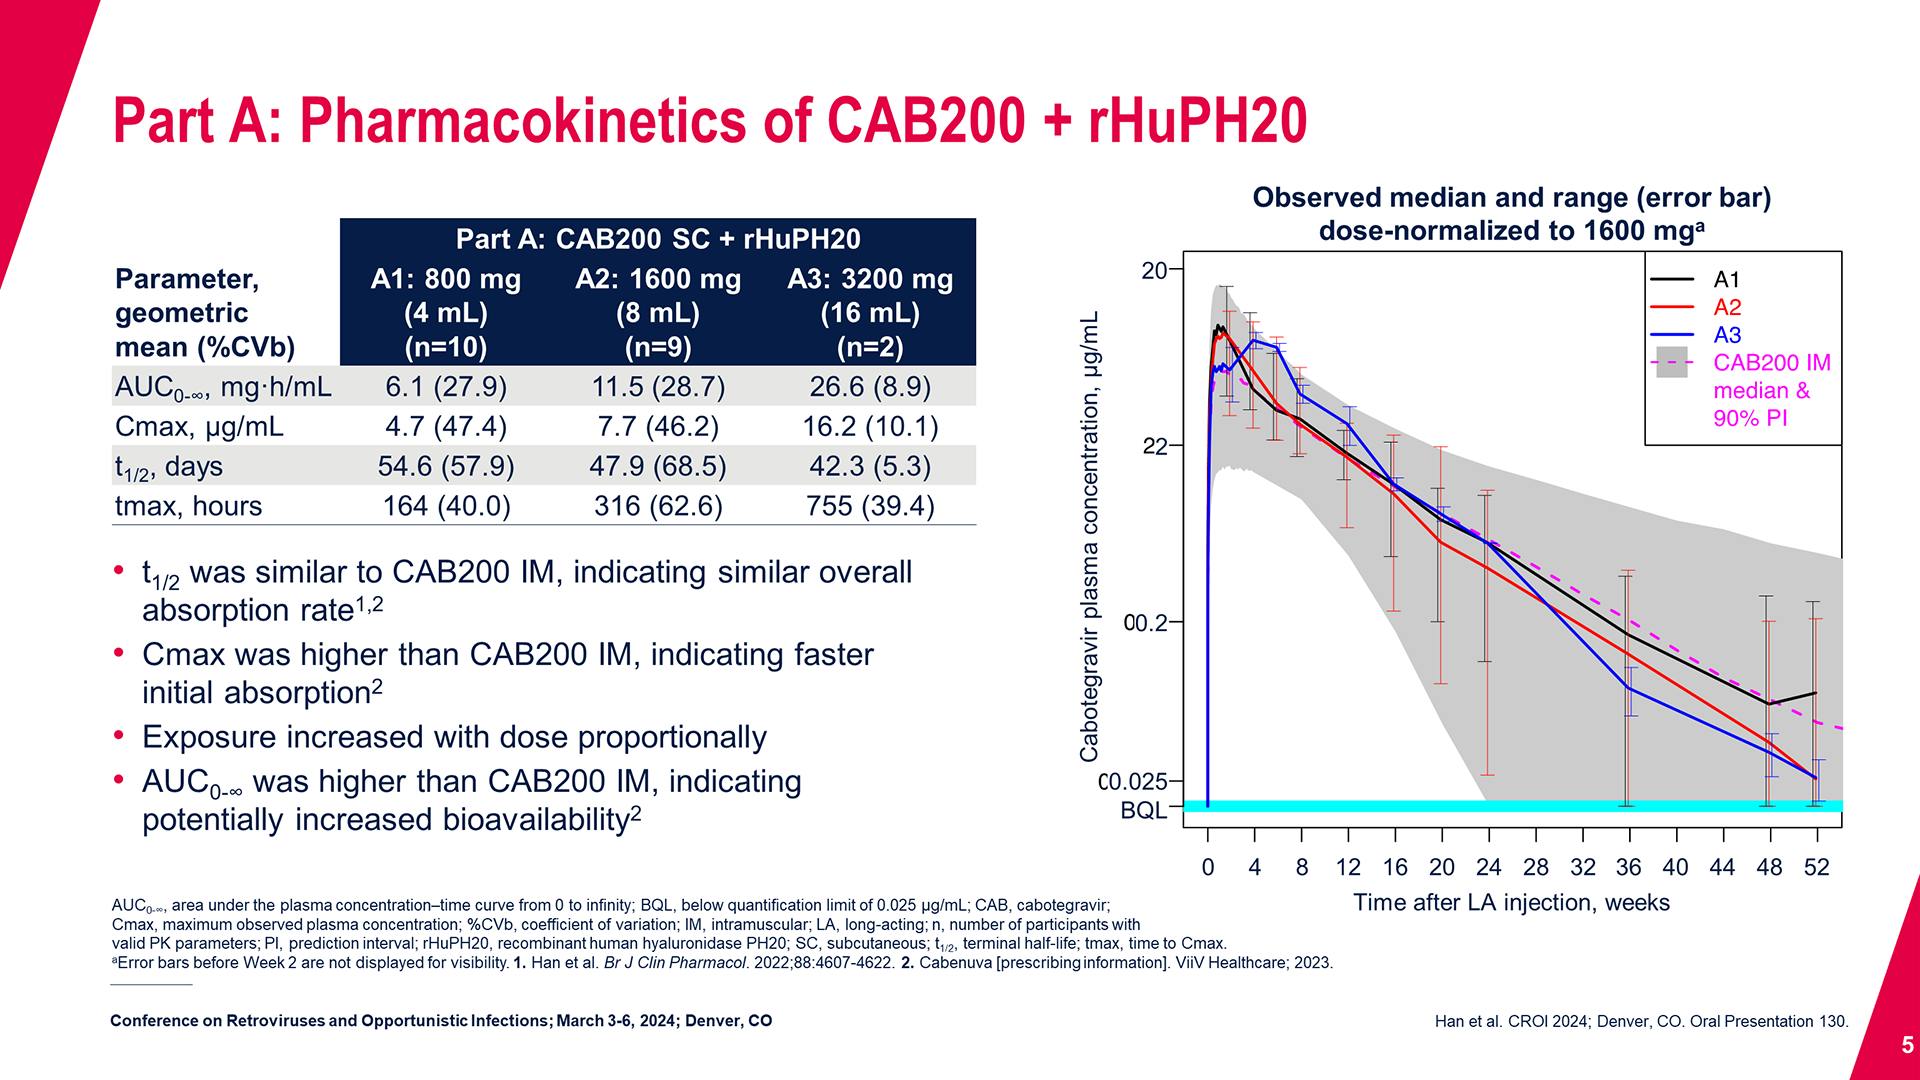 Part A: Pharmacokinetics of CAB200 + rHuPH20